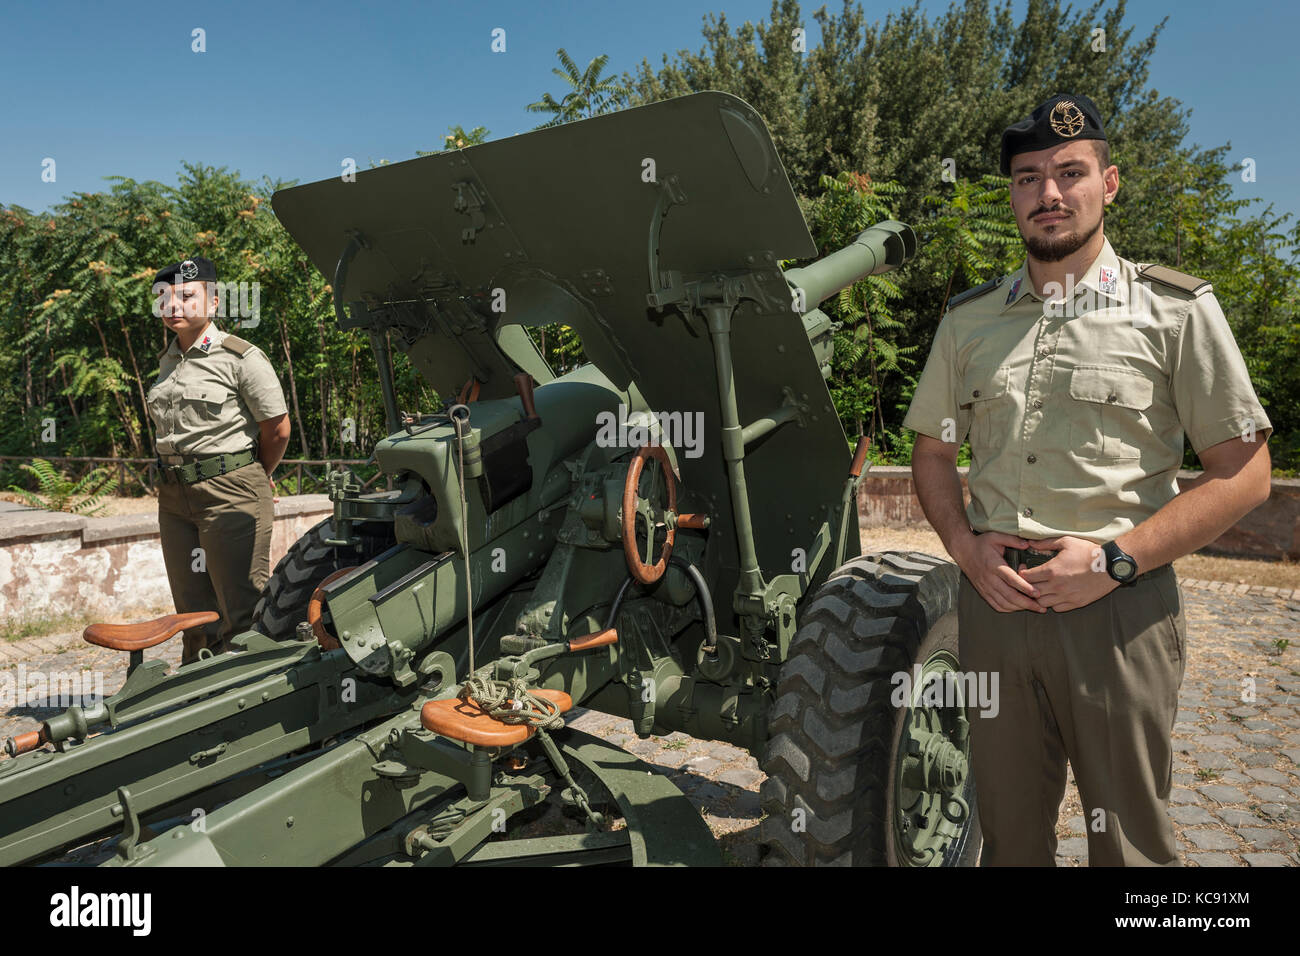 Military personnel pose alongside Rome's noon gun cannon on Janiculum (aka Gianicolo Hill). Stock Photo